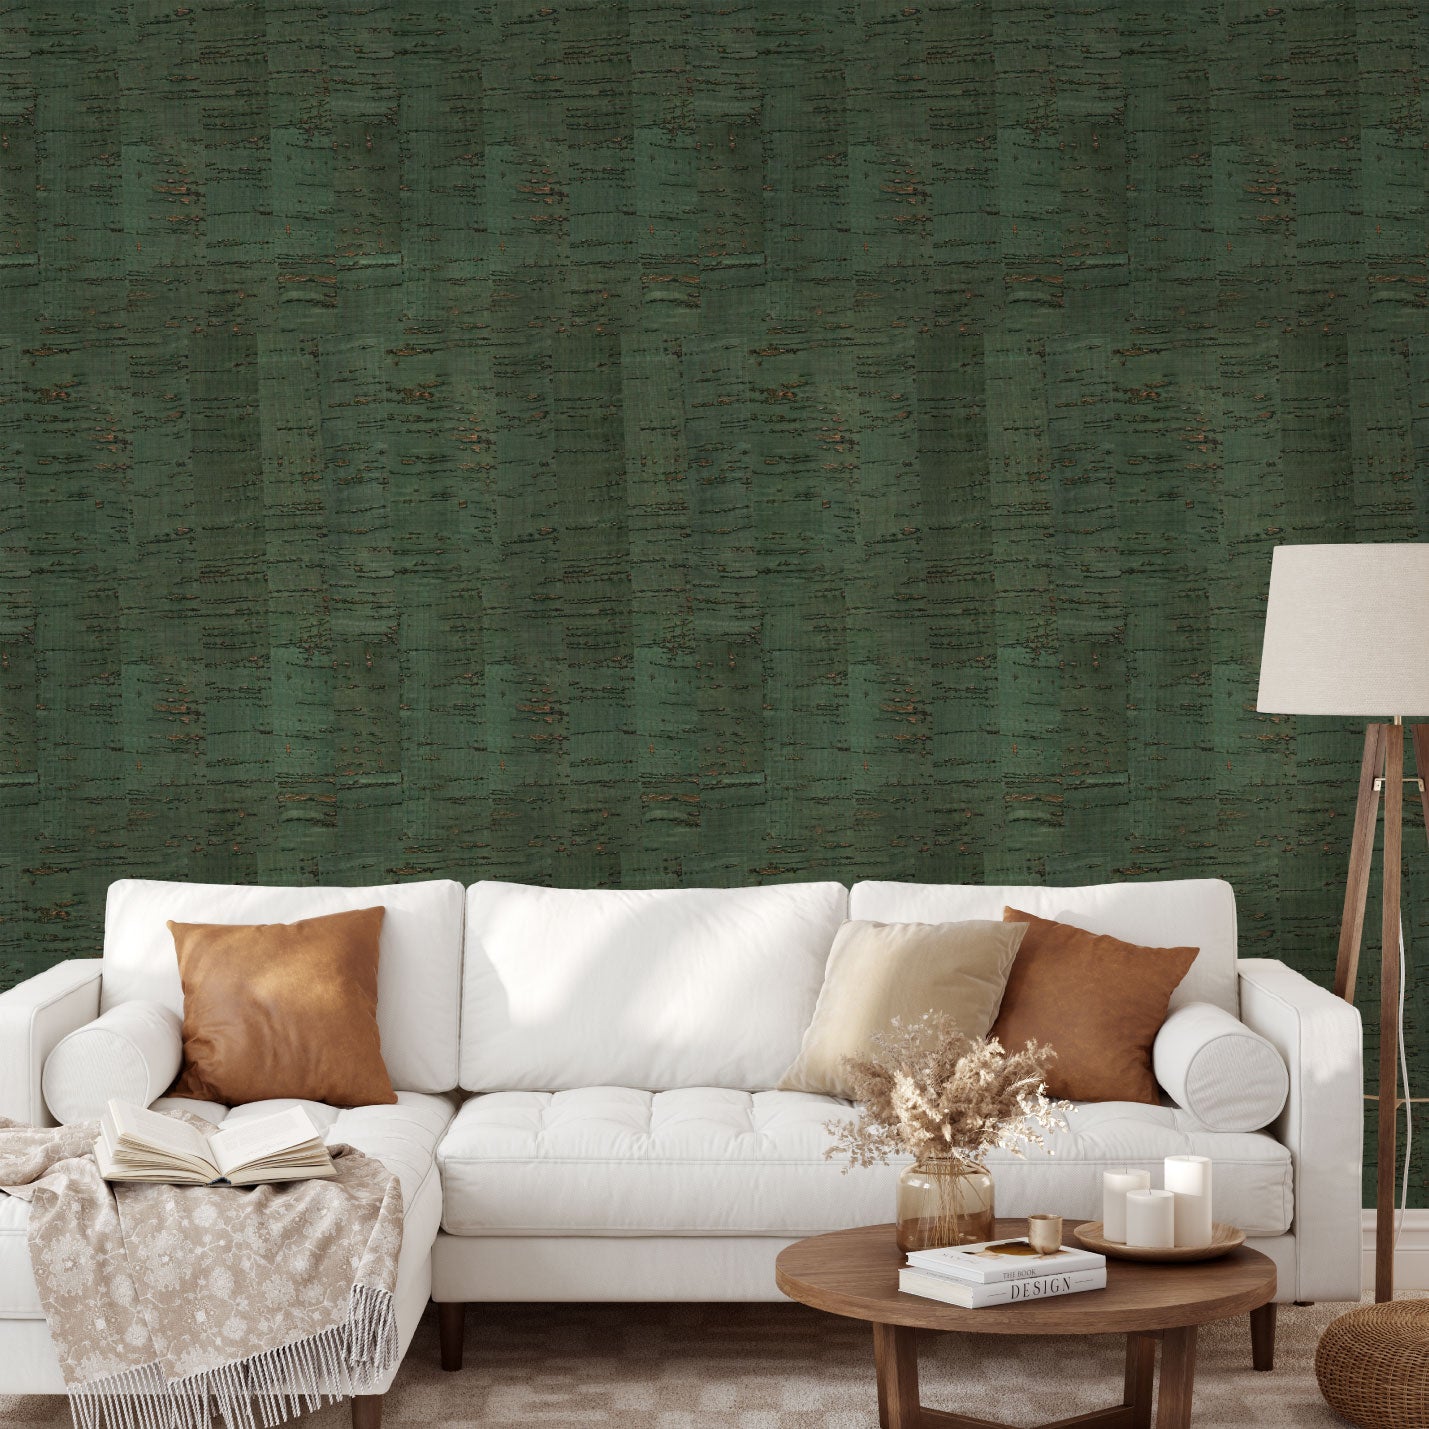 wallpaper Natural Textured Eco-Friendly Non-toxic High-quality  Sustainable Interior Design Bold Custom Tailor-made Retro chic cork  Rustic Cabin cottage Luxury Contemporary Bespoke nature inspired  gold metallic shimmer shinny lux green emerald hunter living room